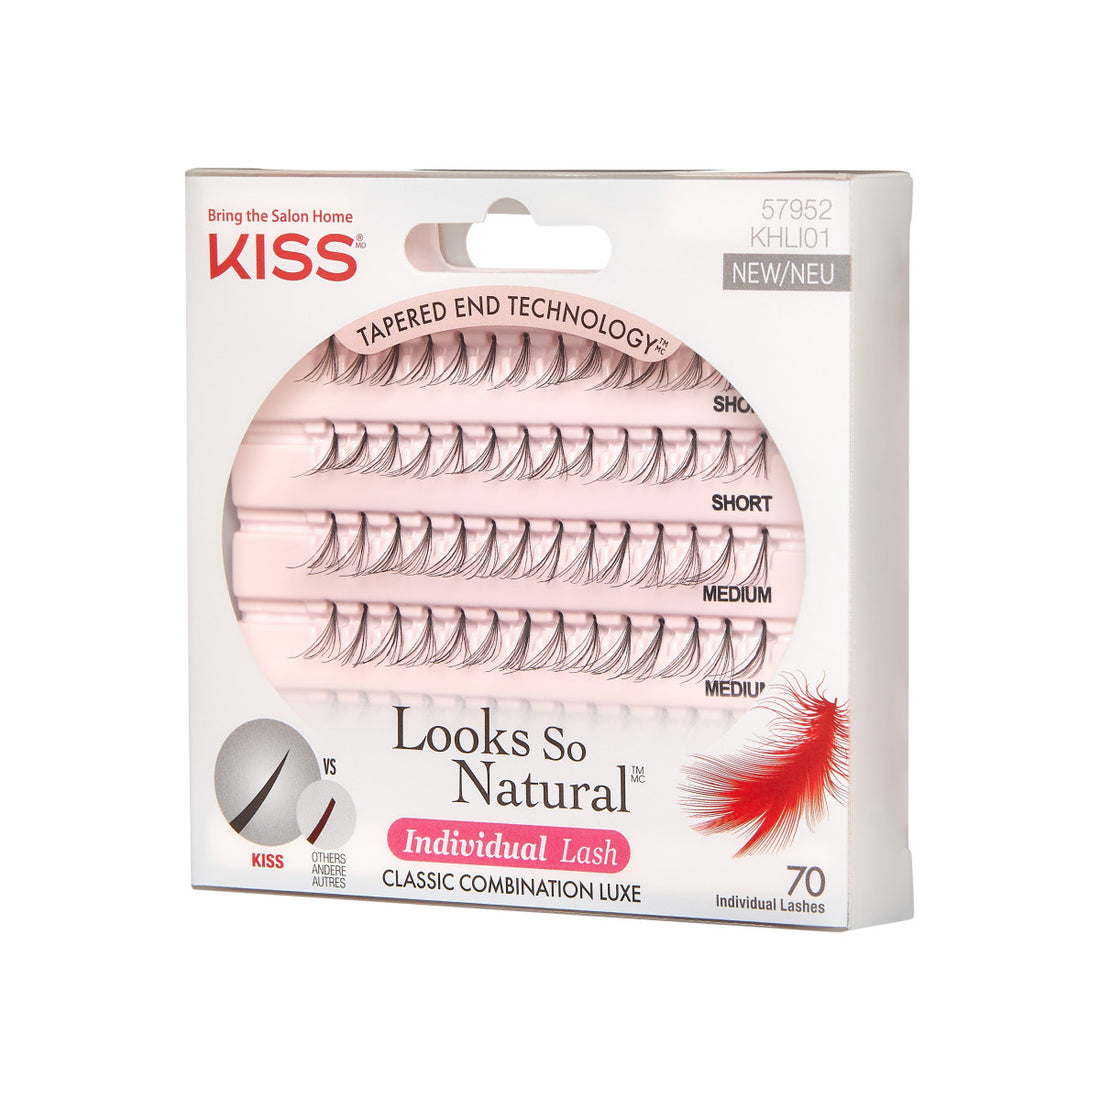 KISS Looks So Natural Individual Lash Clusters, Classic Combination Luxe, 70 Pieces